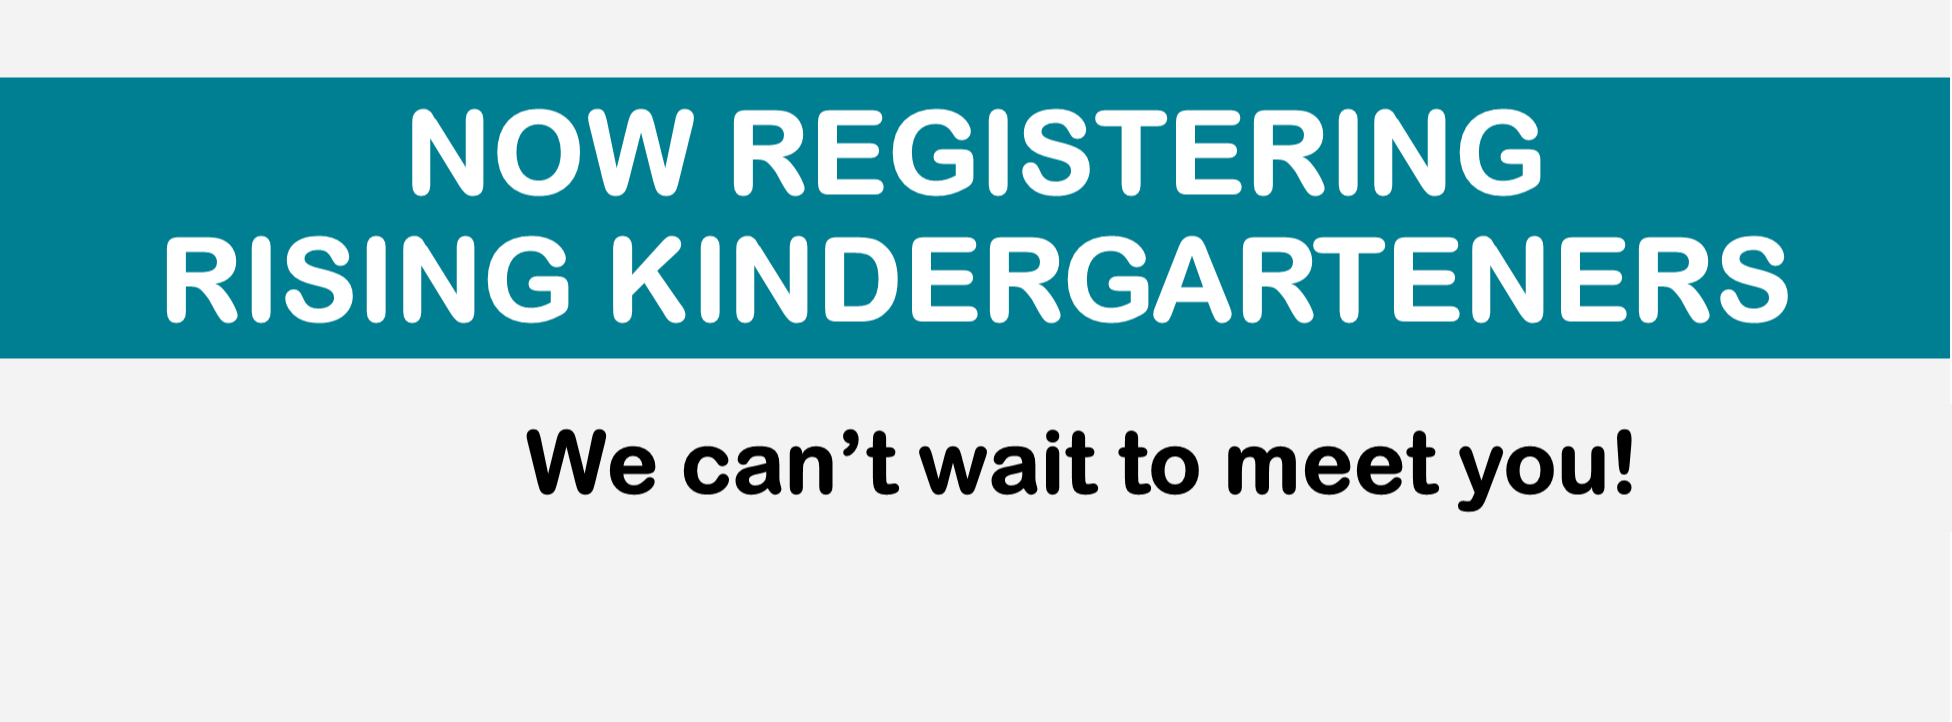 Now registering rising Kindergarteners. We can't wait to meet you!